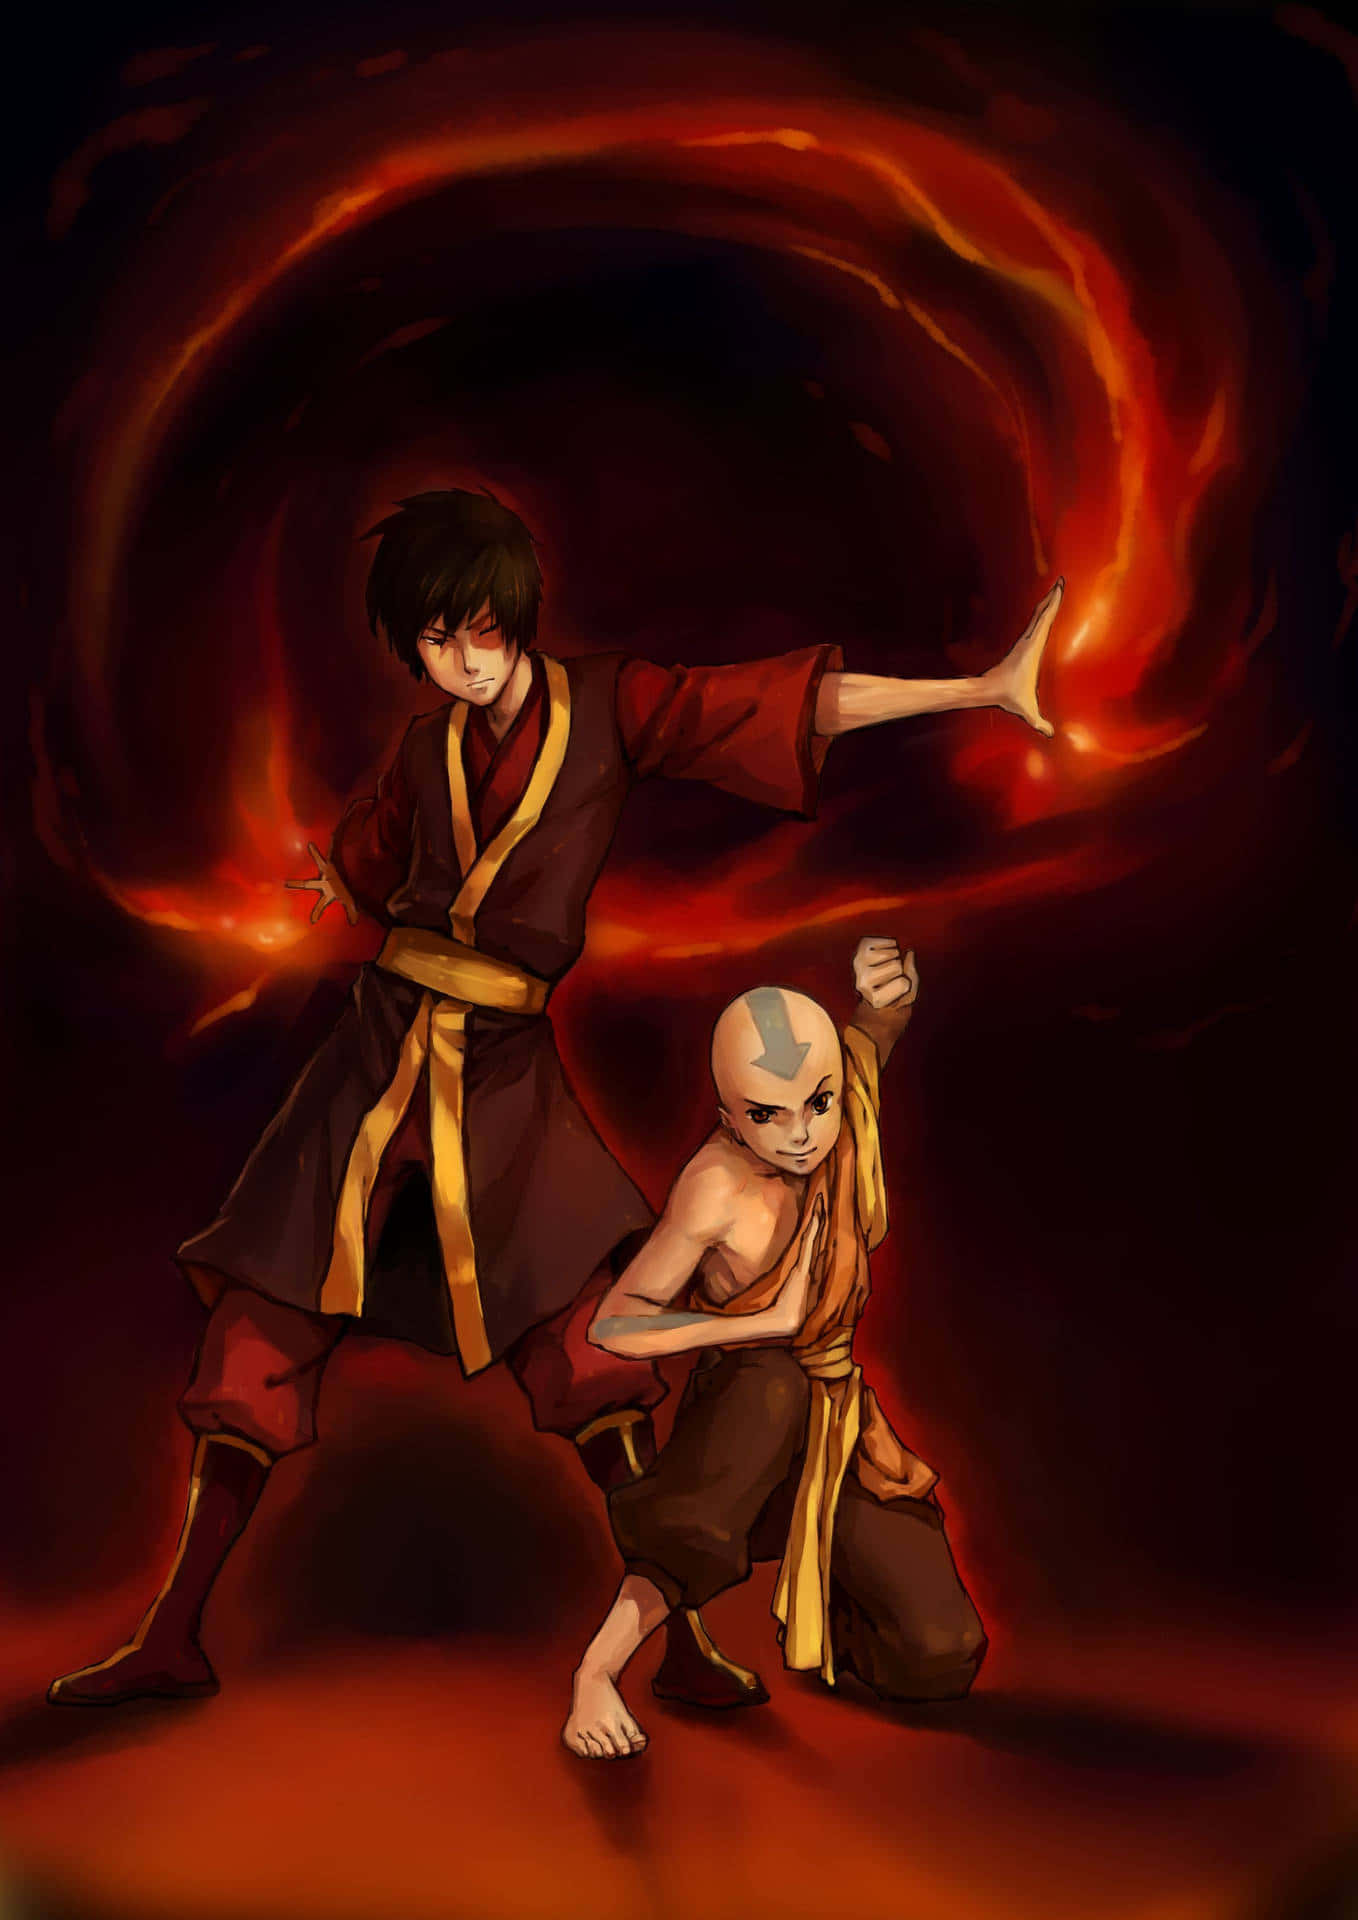 Strike a Heroic Pose with Zuko from Avatar the Last Airbender